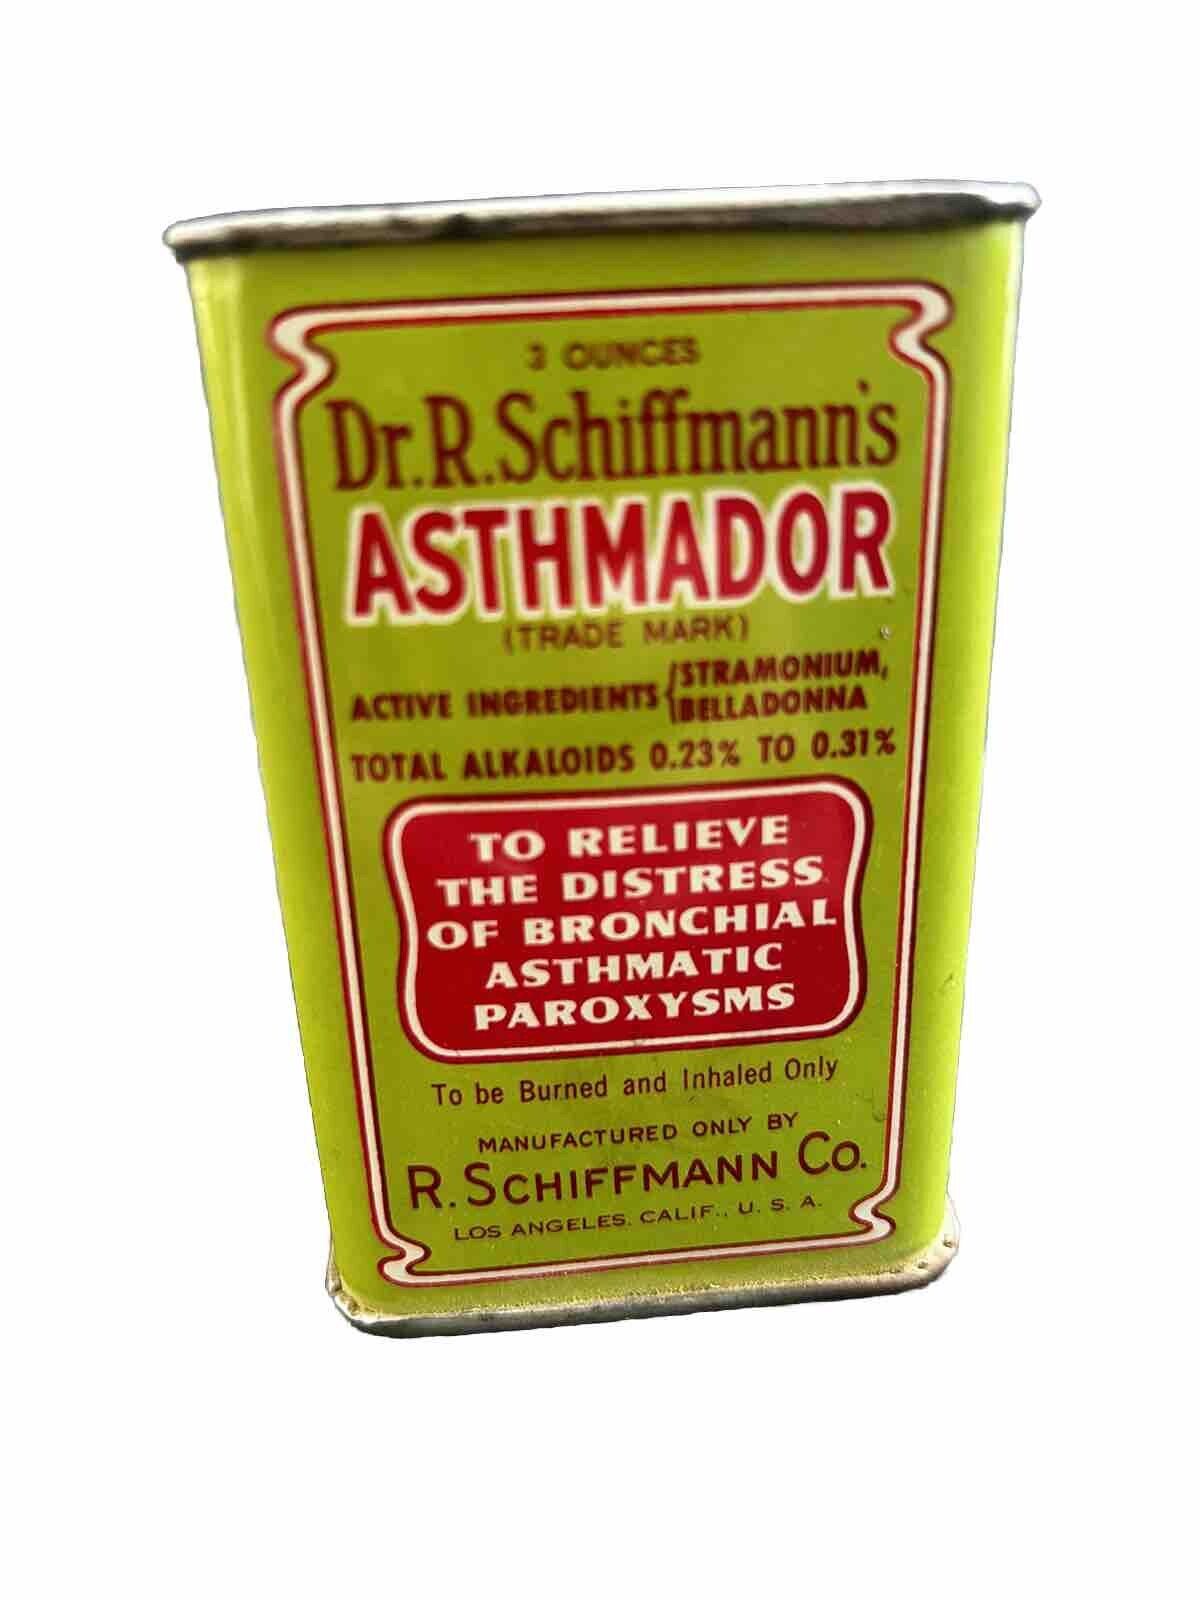 Asthmador Dr. R. Schiffmann\'s 6 Oz. Litho Tin Container, 1940s Inhalation Full